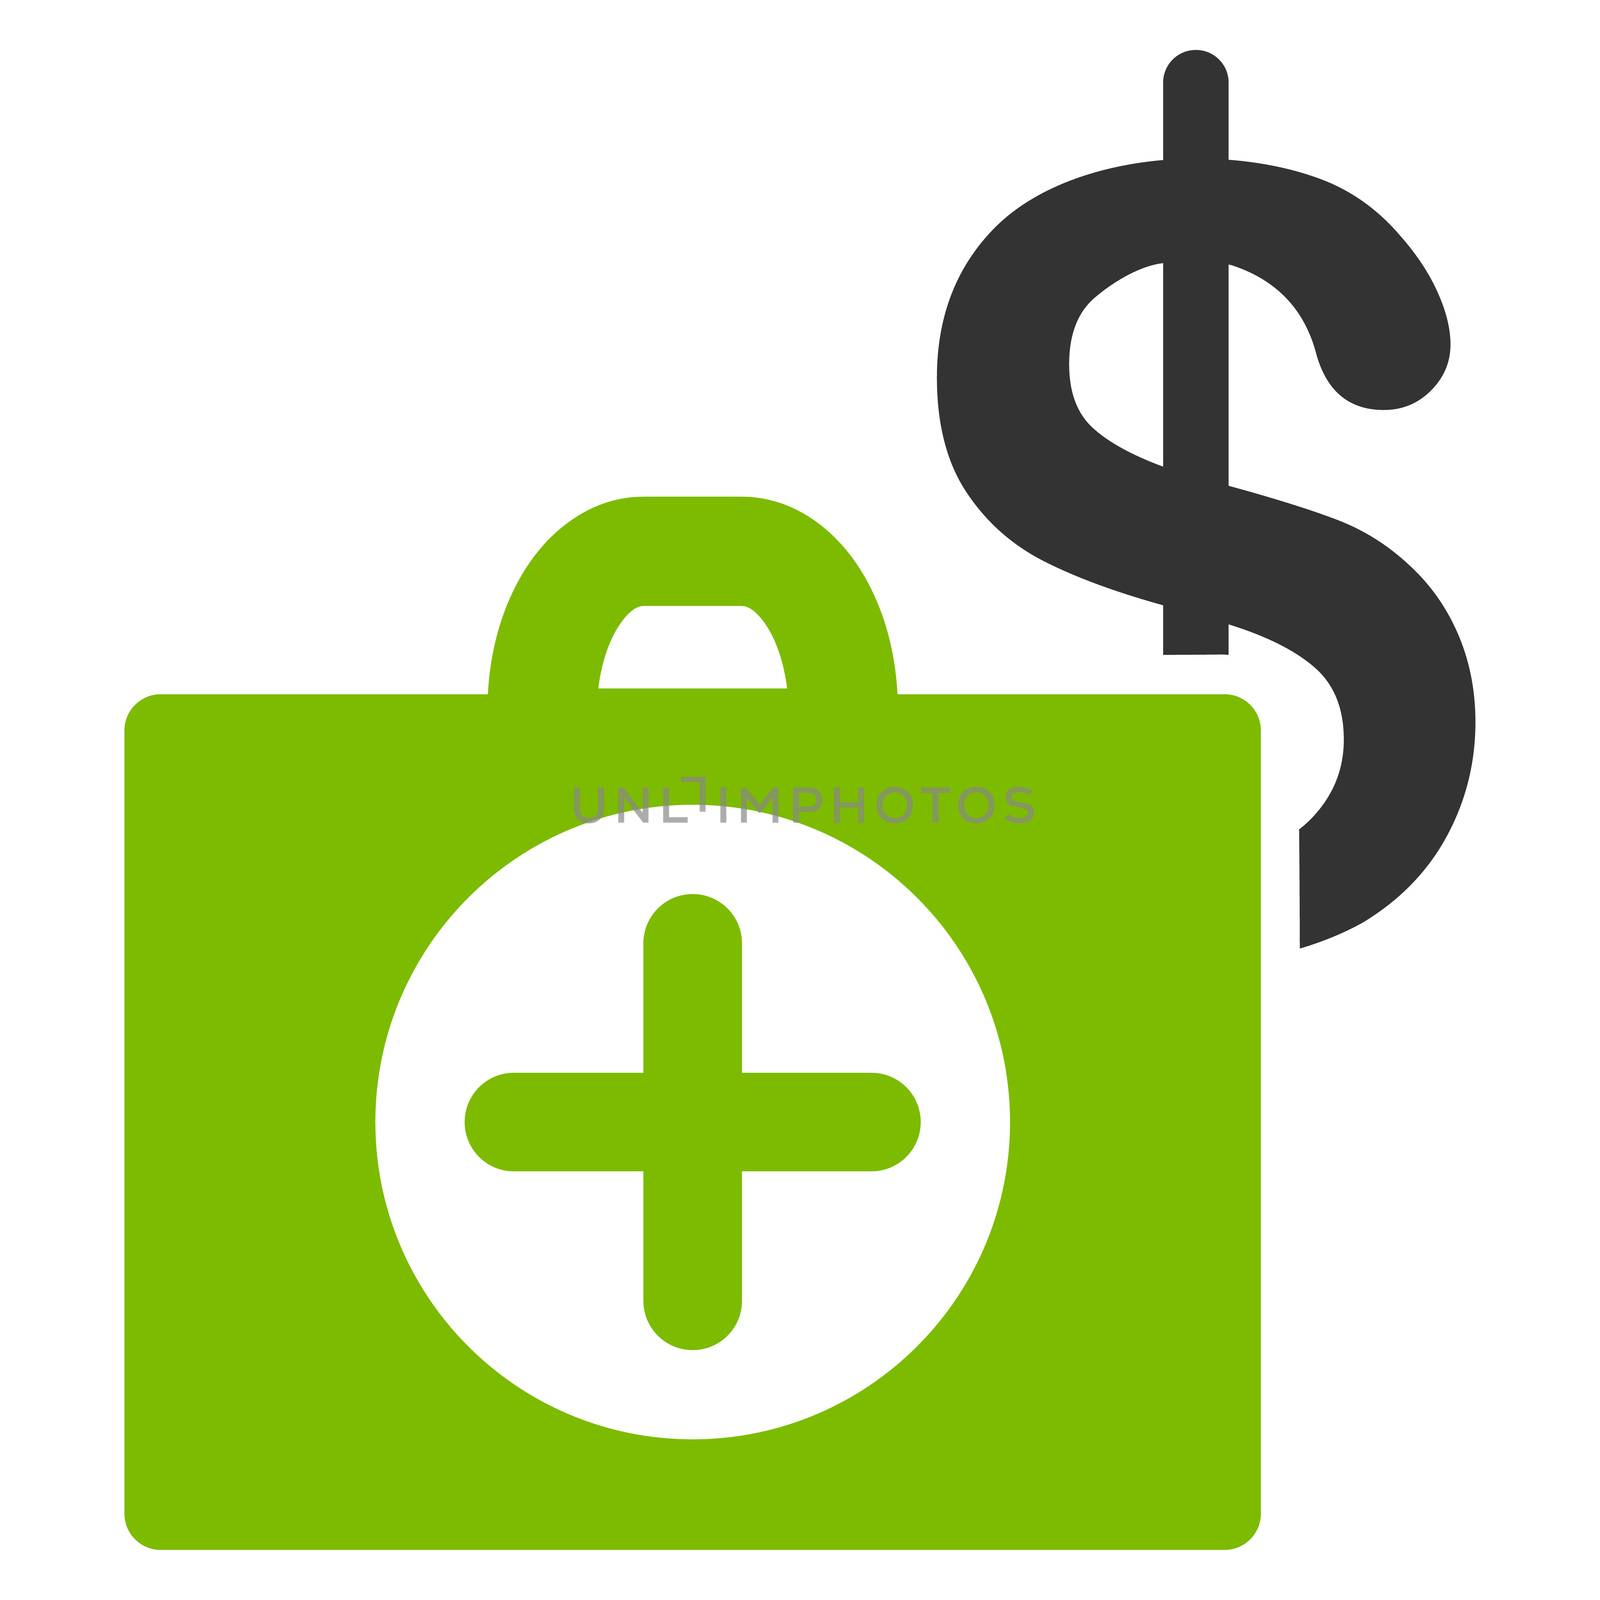 Payment Healthcare raster icon. Style is bicolor flat symbol, eco green and gray colors, rounded angles, white background.